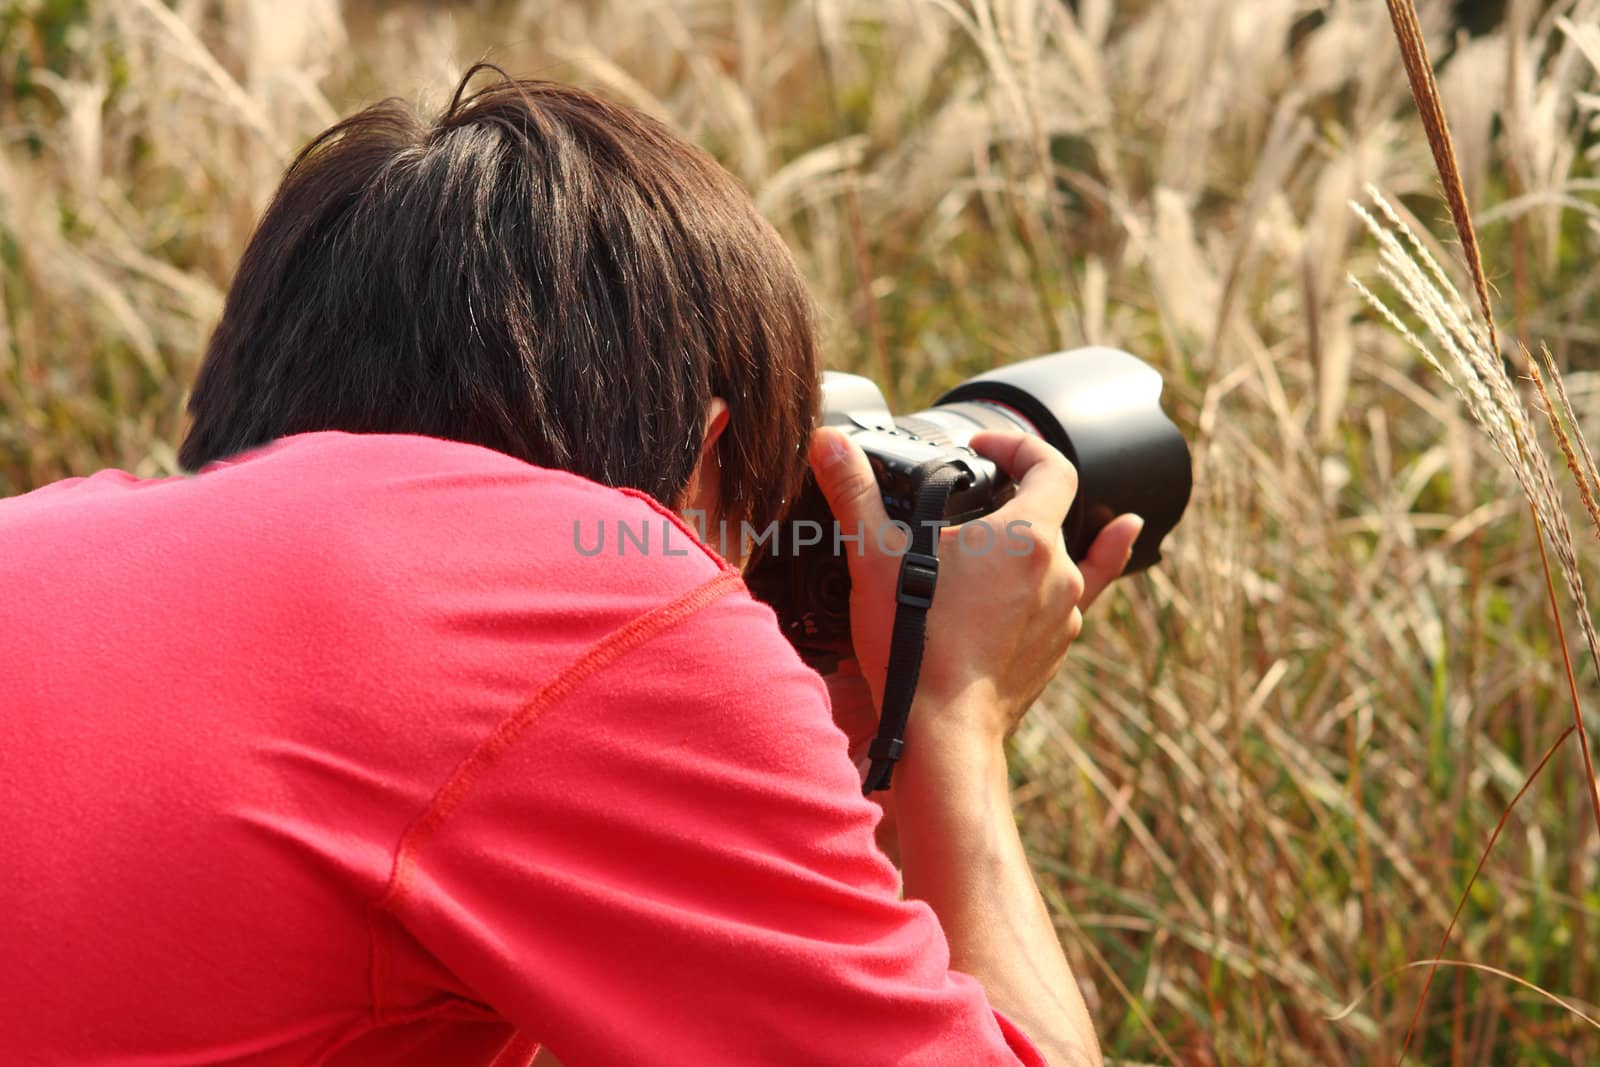 photographer taking photo in country side 